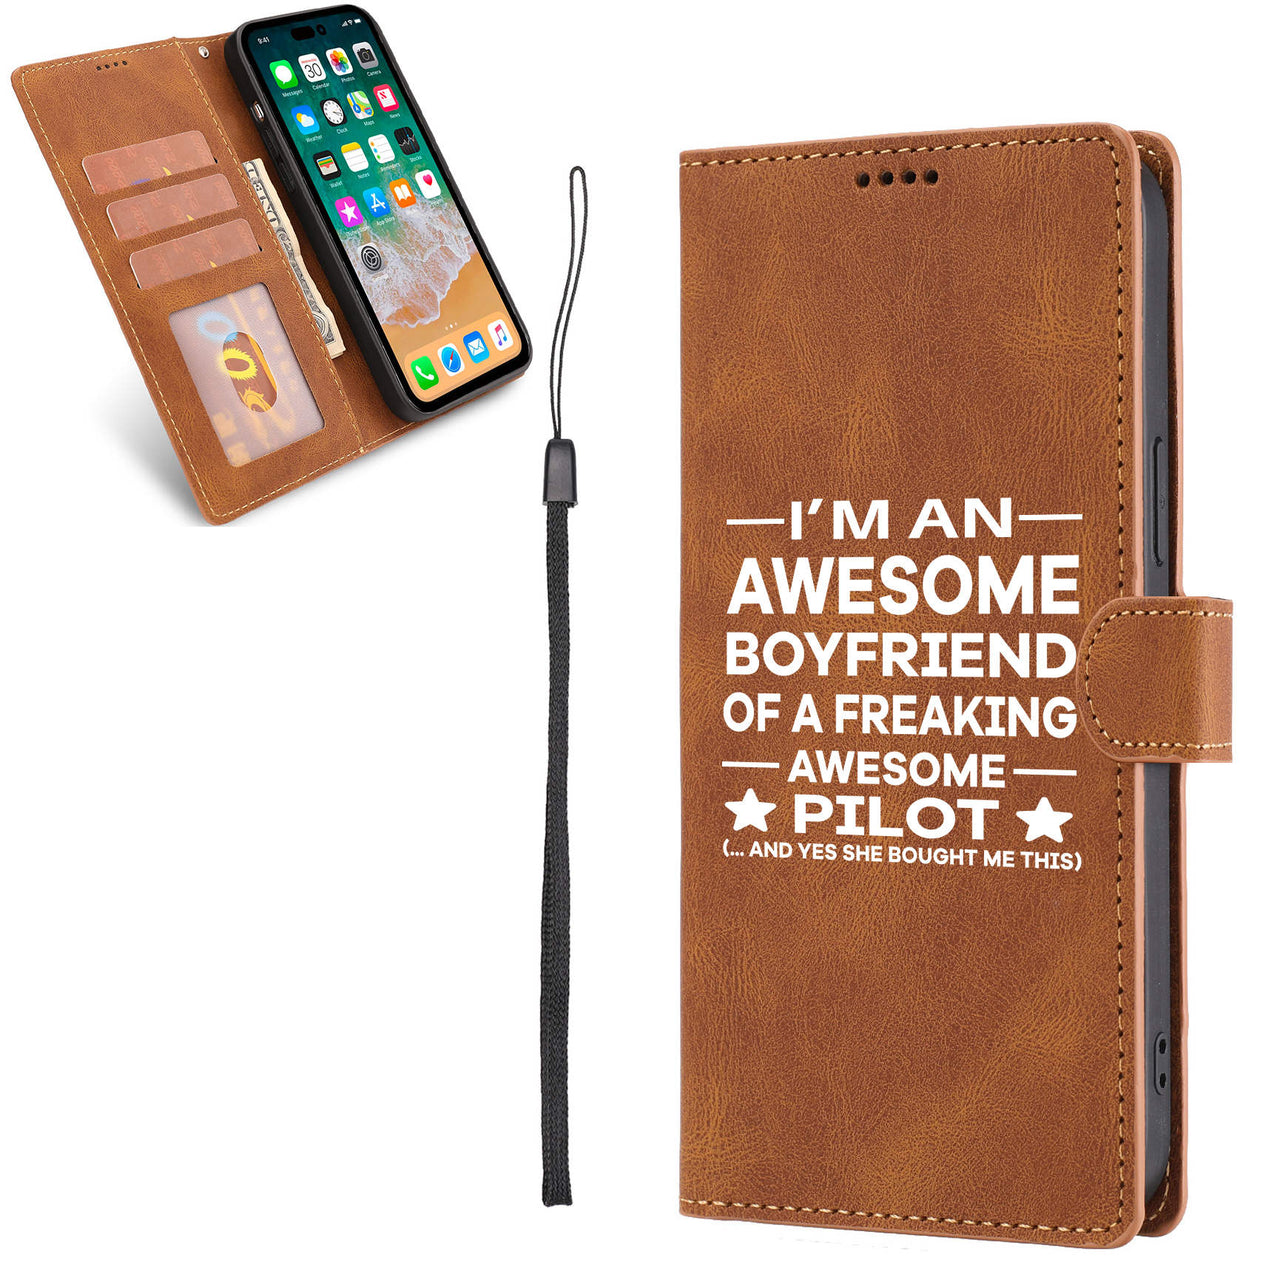 I am an Awesome Boyfriend Designed Leather iPhone Cases